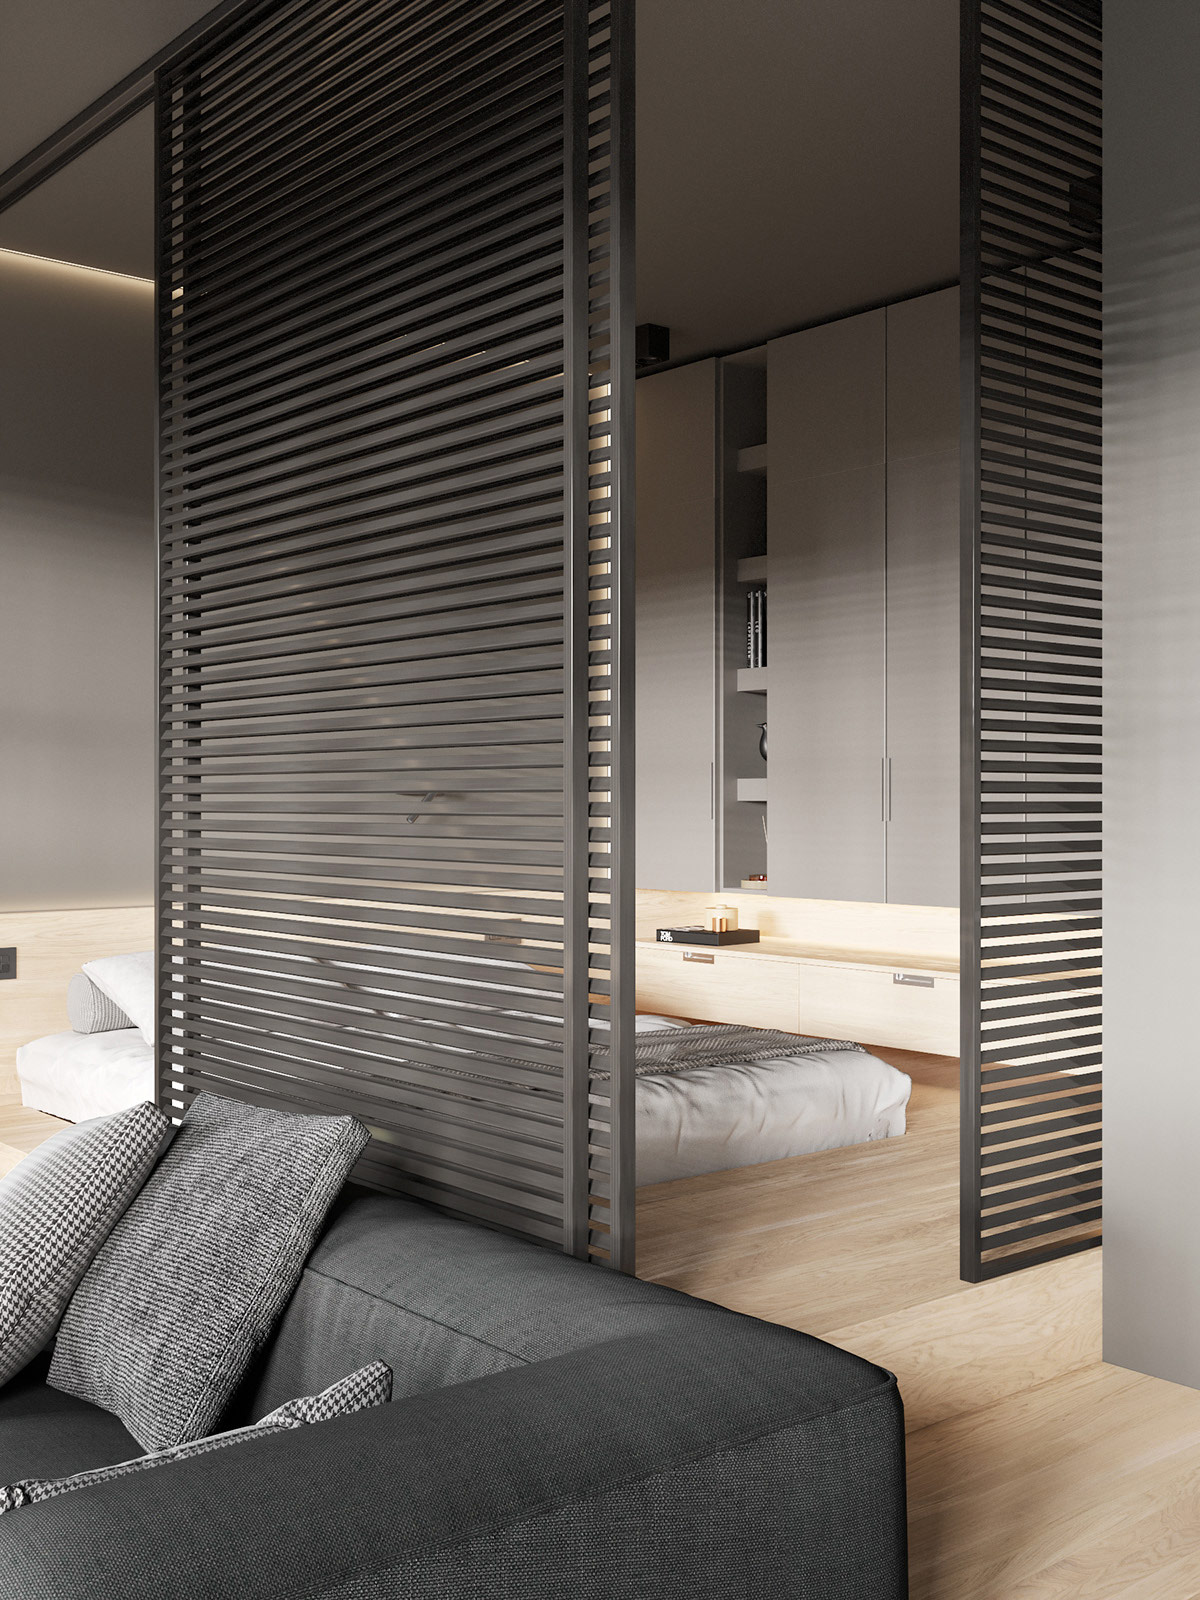 apartment-dividers-for-sleeping-area-600